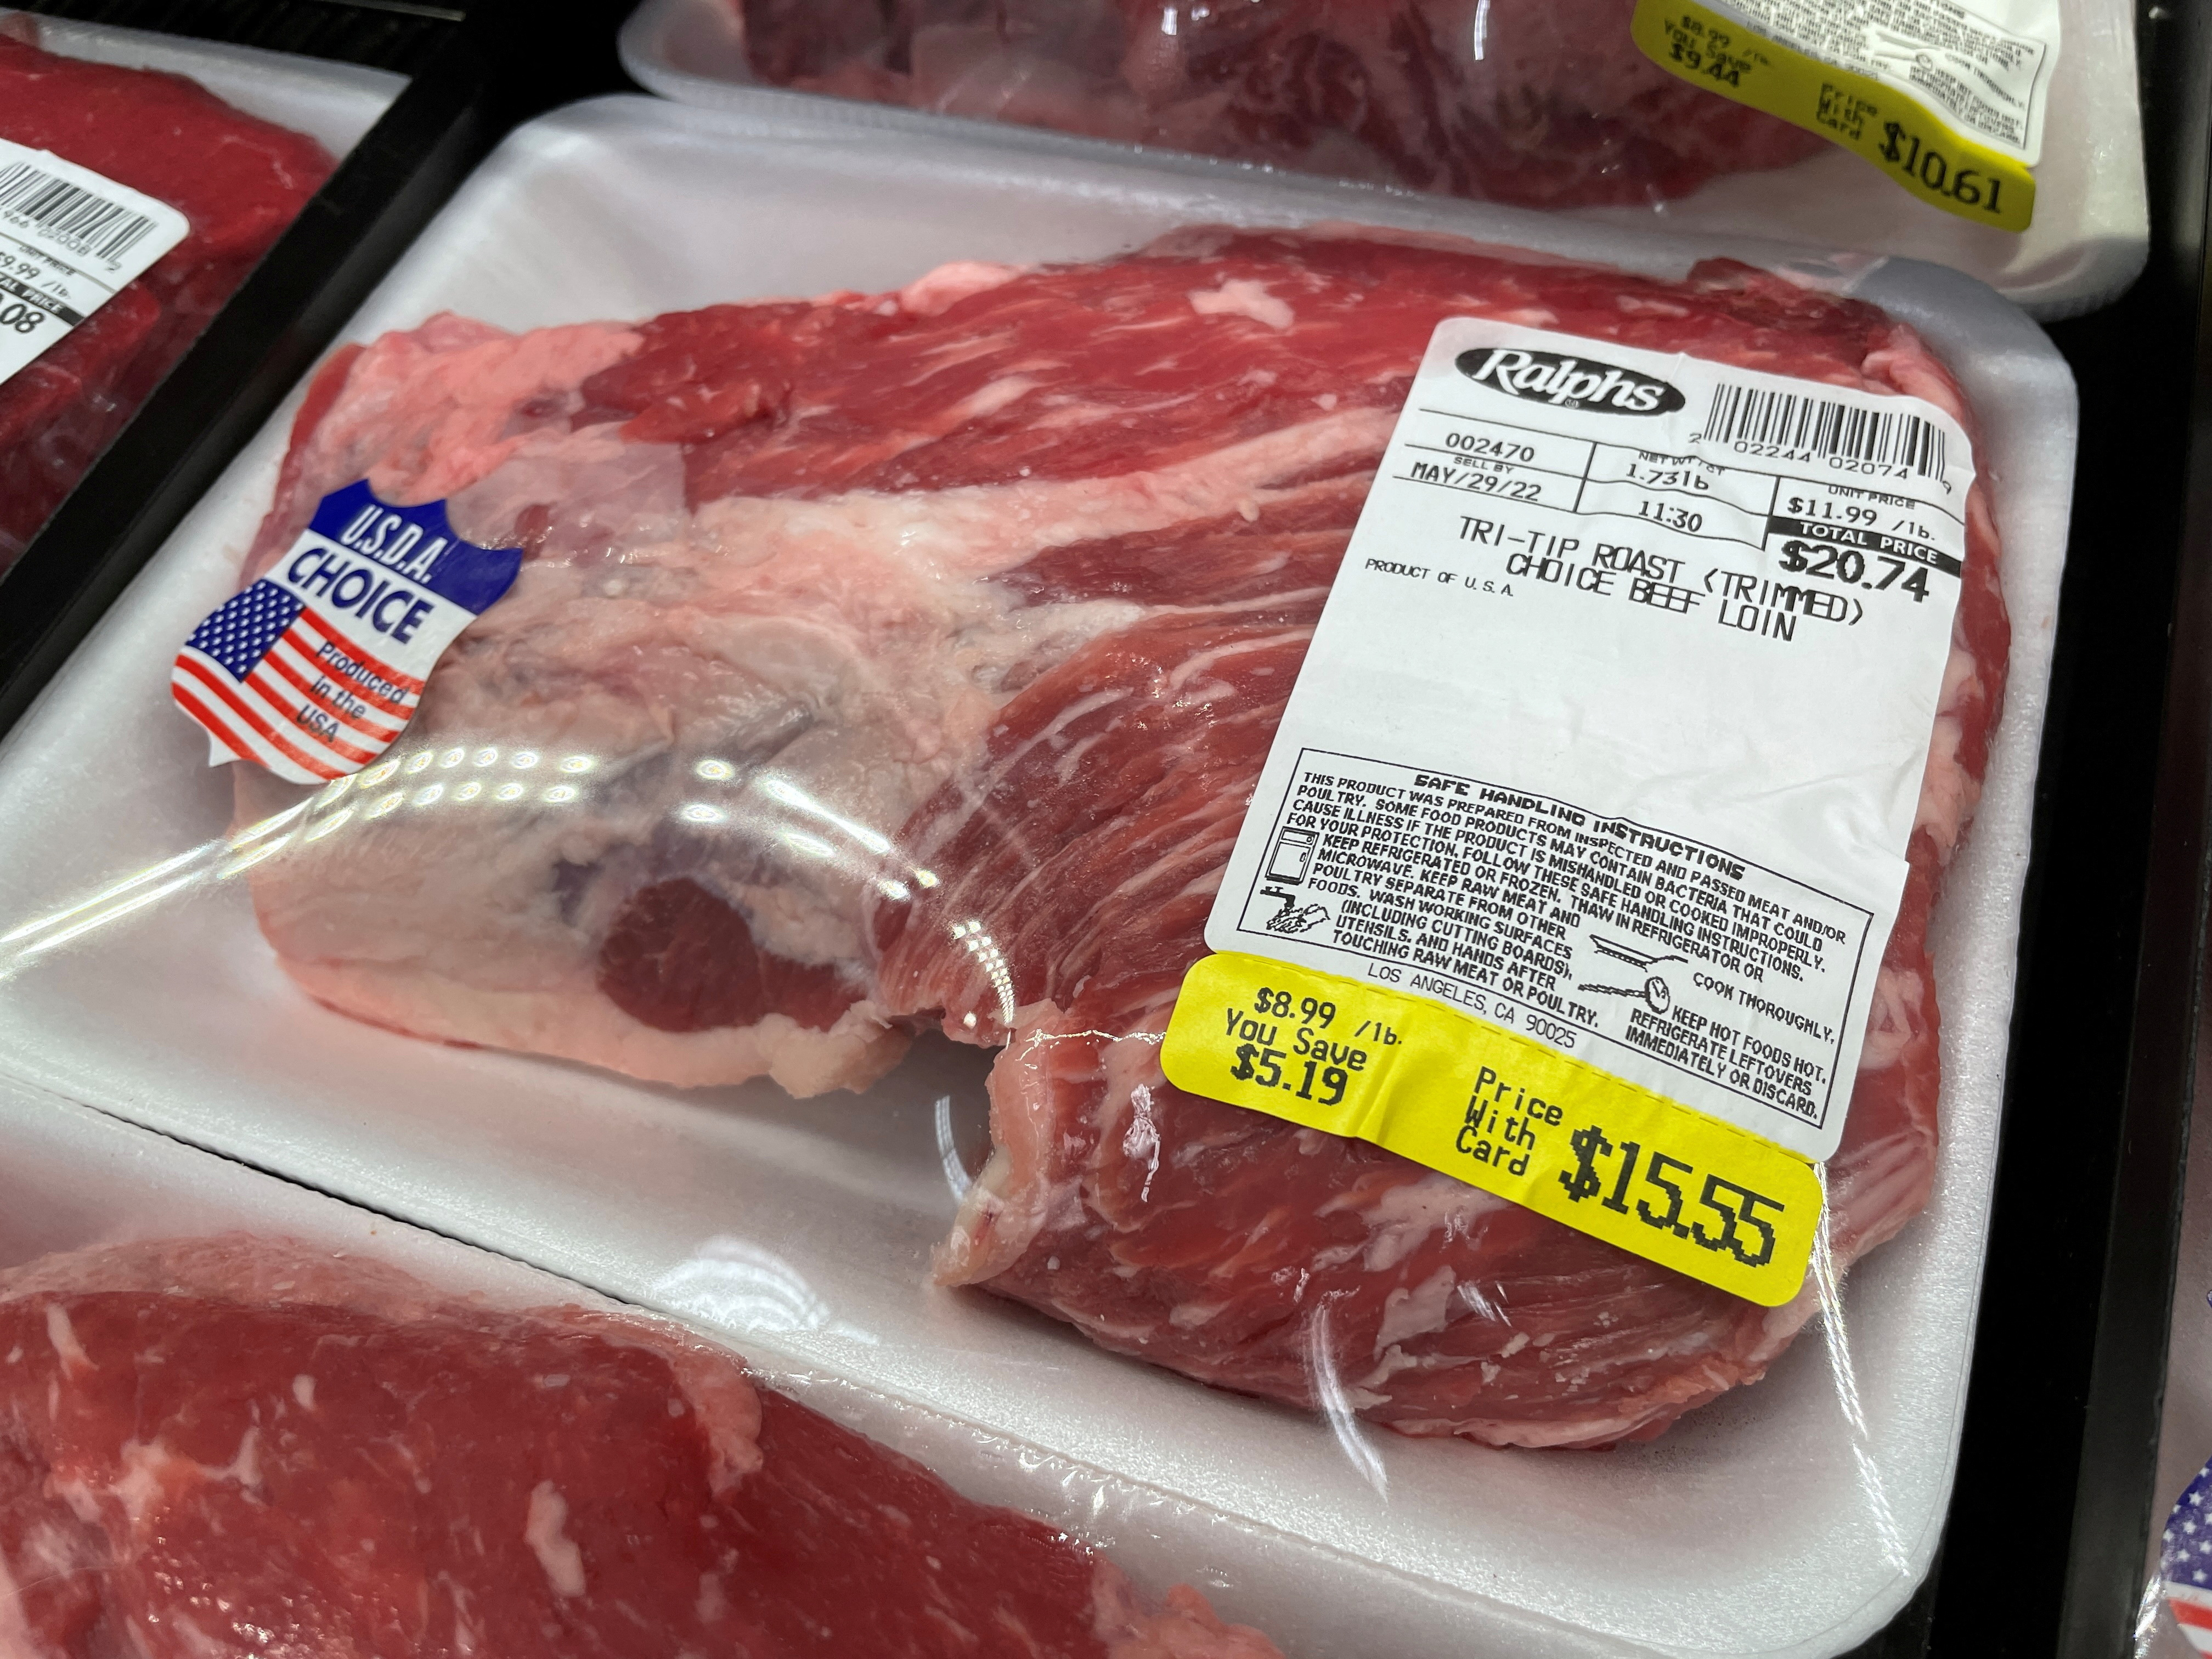 Beef is seen in a supermarket in Los Angeles as inflation continues to hit consumers with the annual CPI increasing 8.3% in the 12 months through April